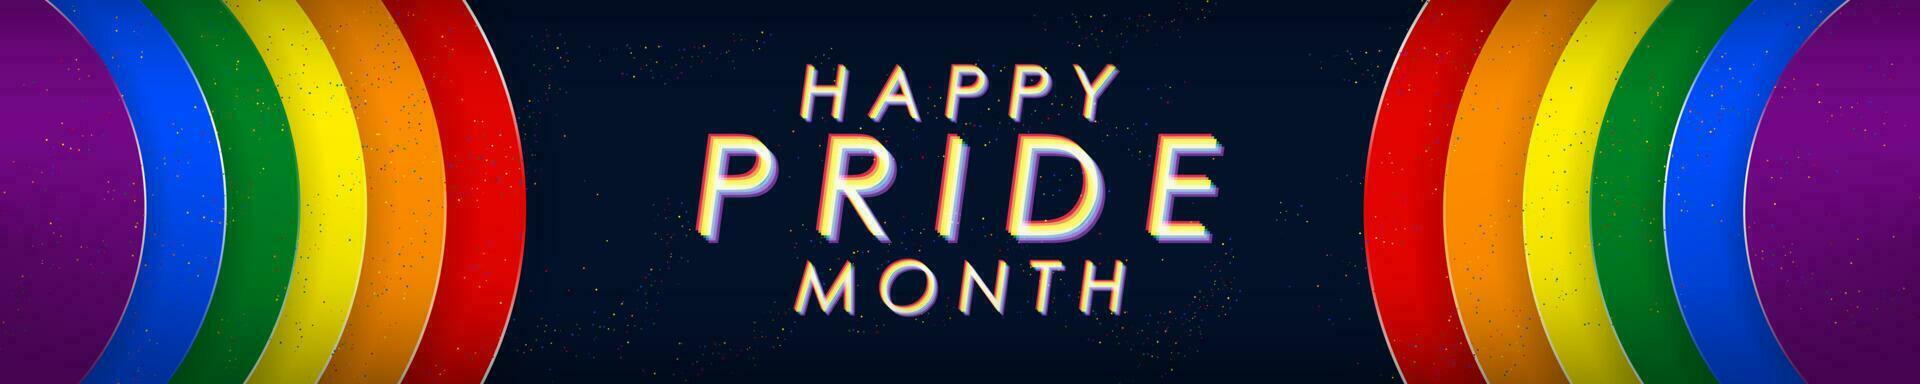 Long Horizontal Happy Pride Month header with geometric paper cutout design in rainbow pride flag colors. Vector Illustration. EPS 10.